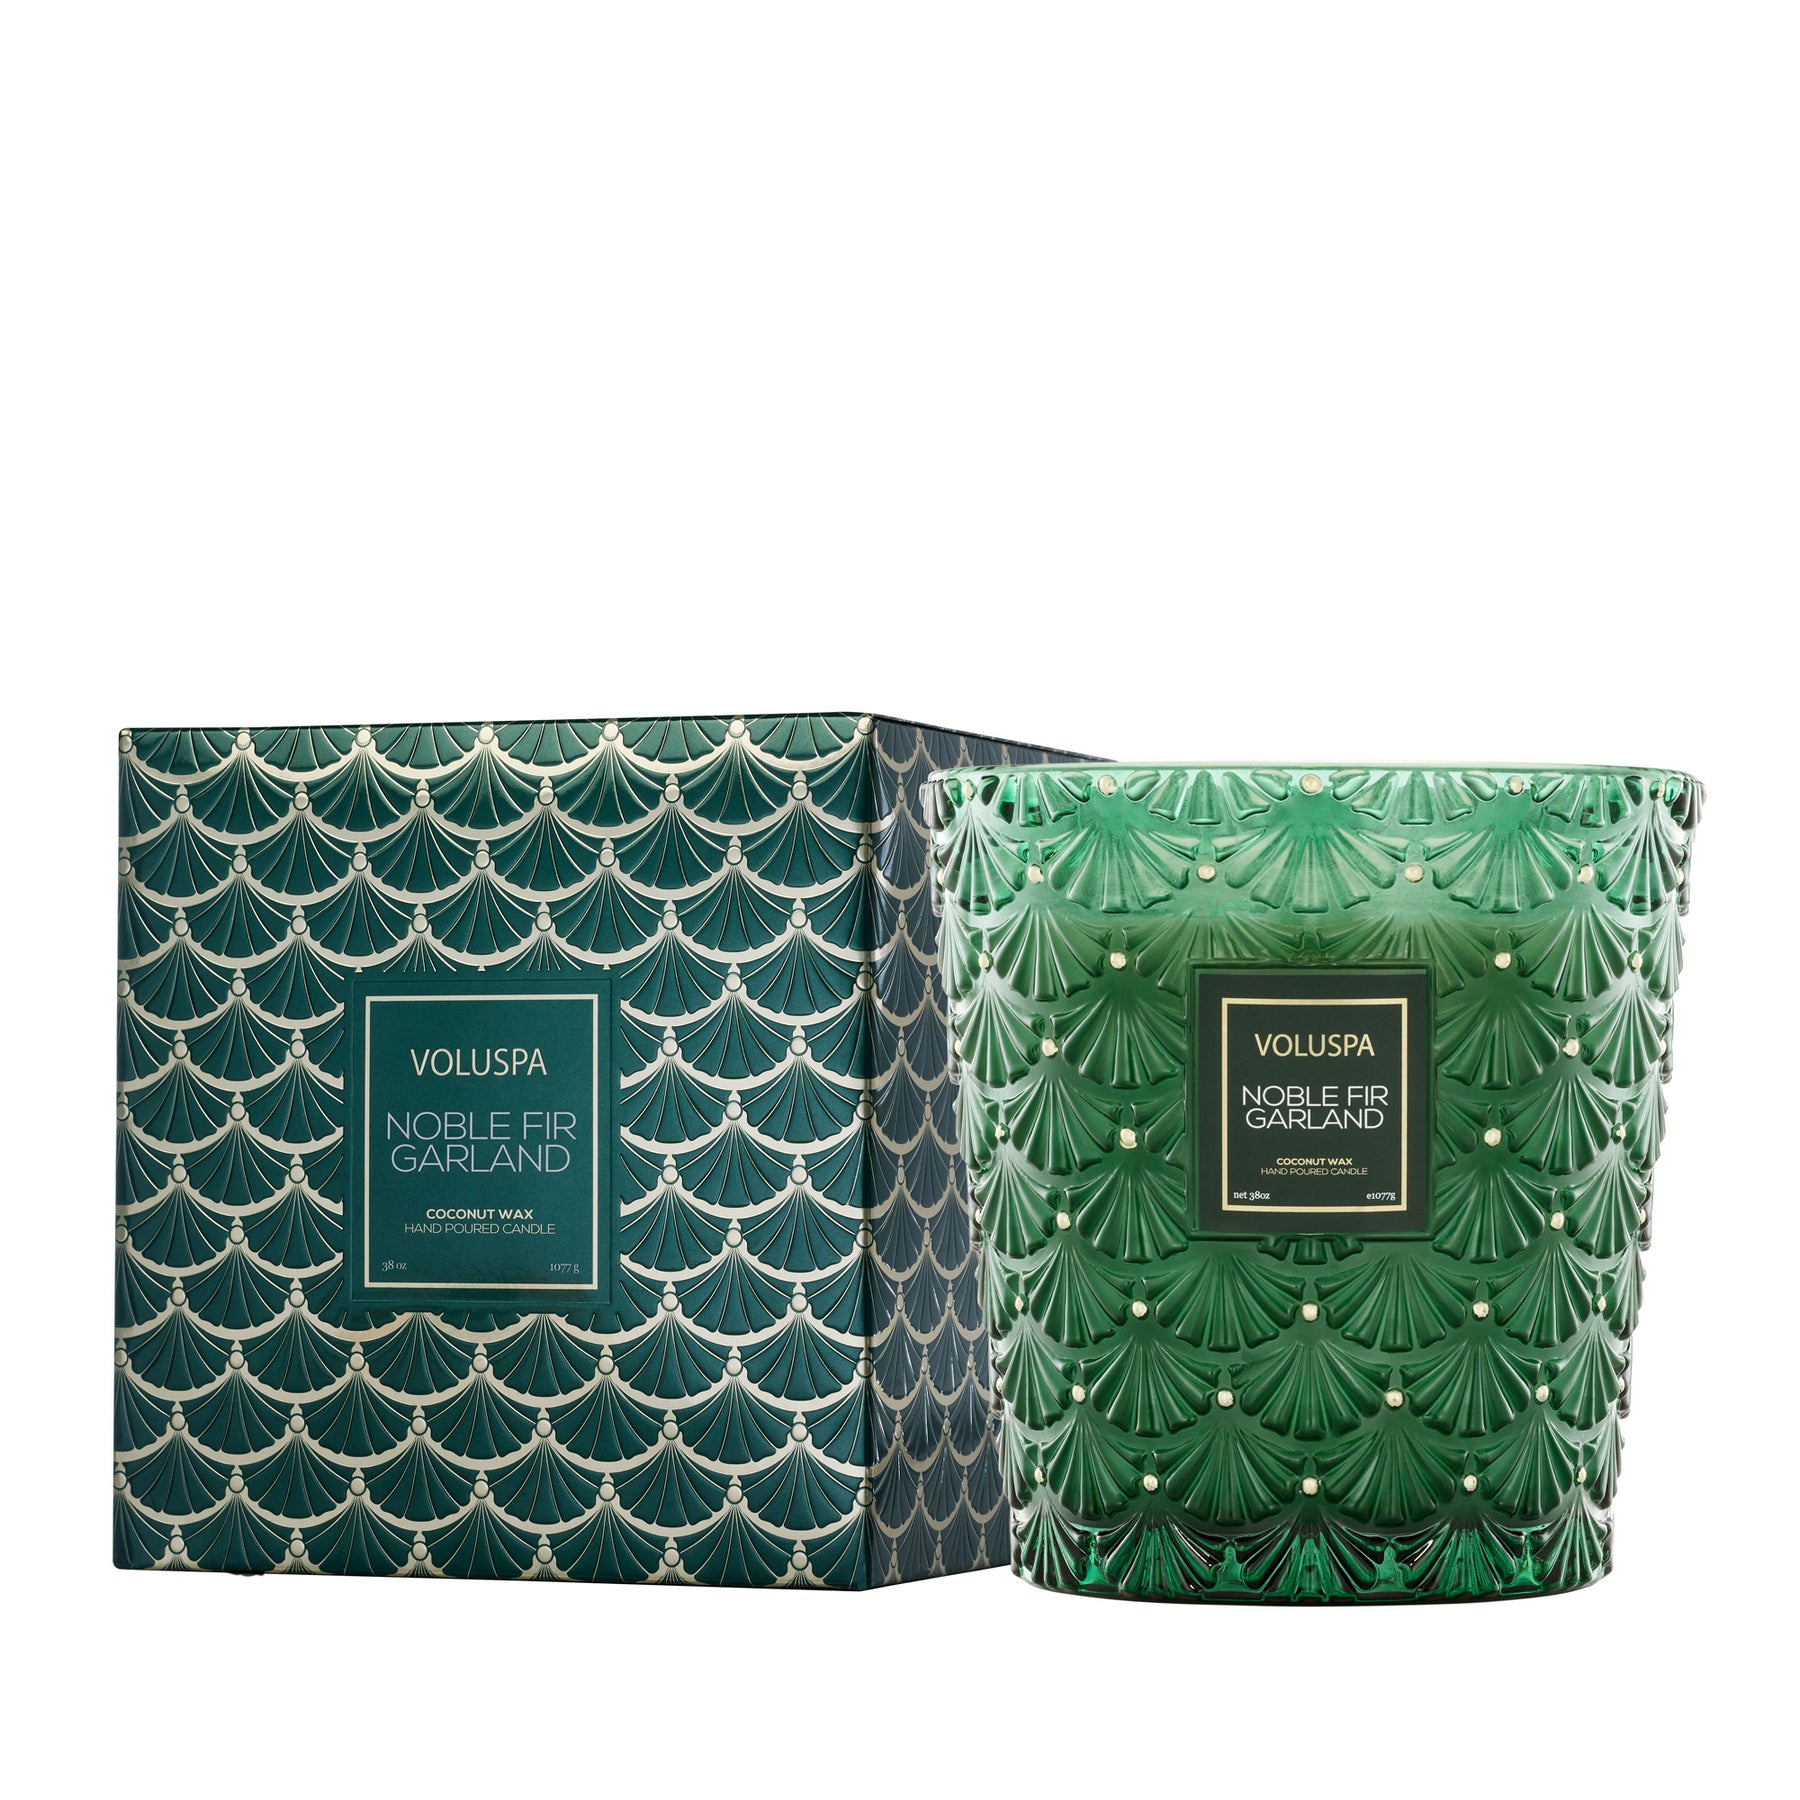 Noble Fir Garland - 3 Wick Hearth Candle